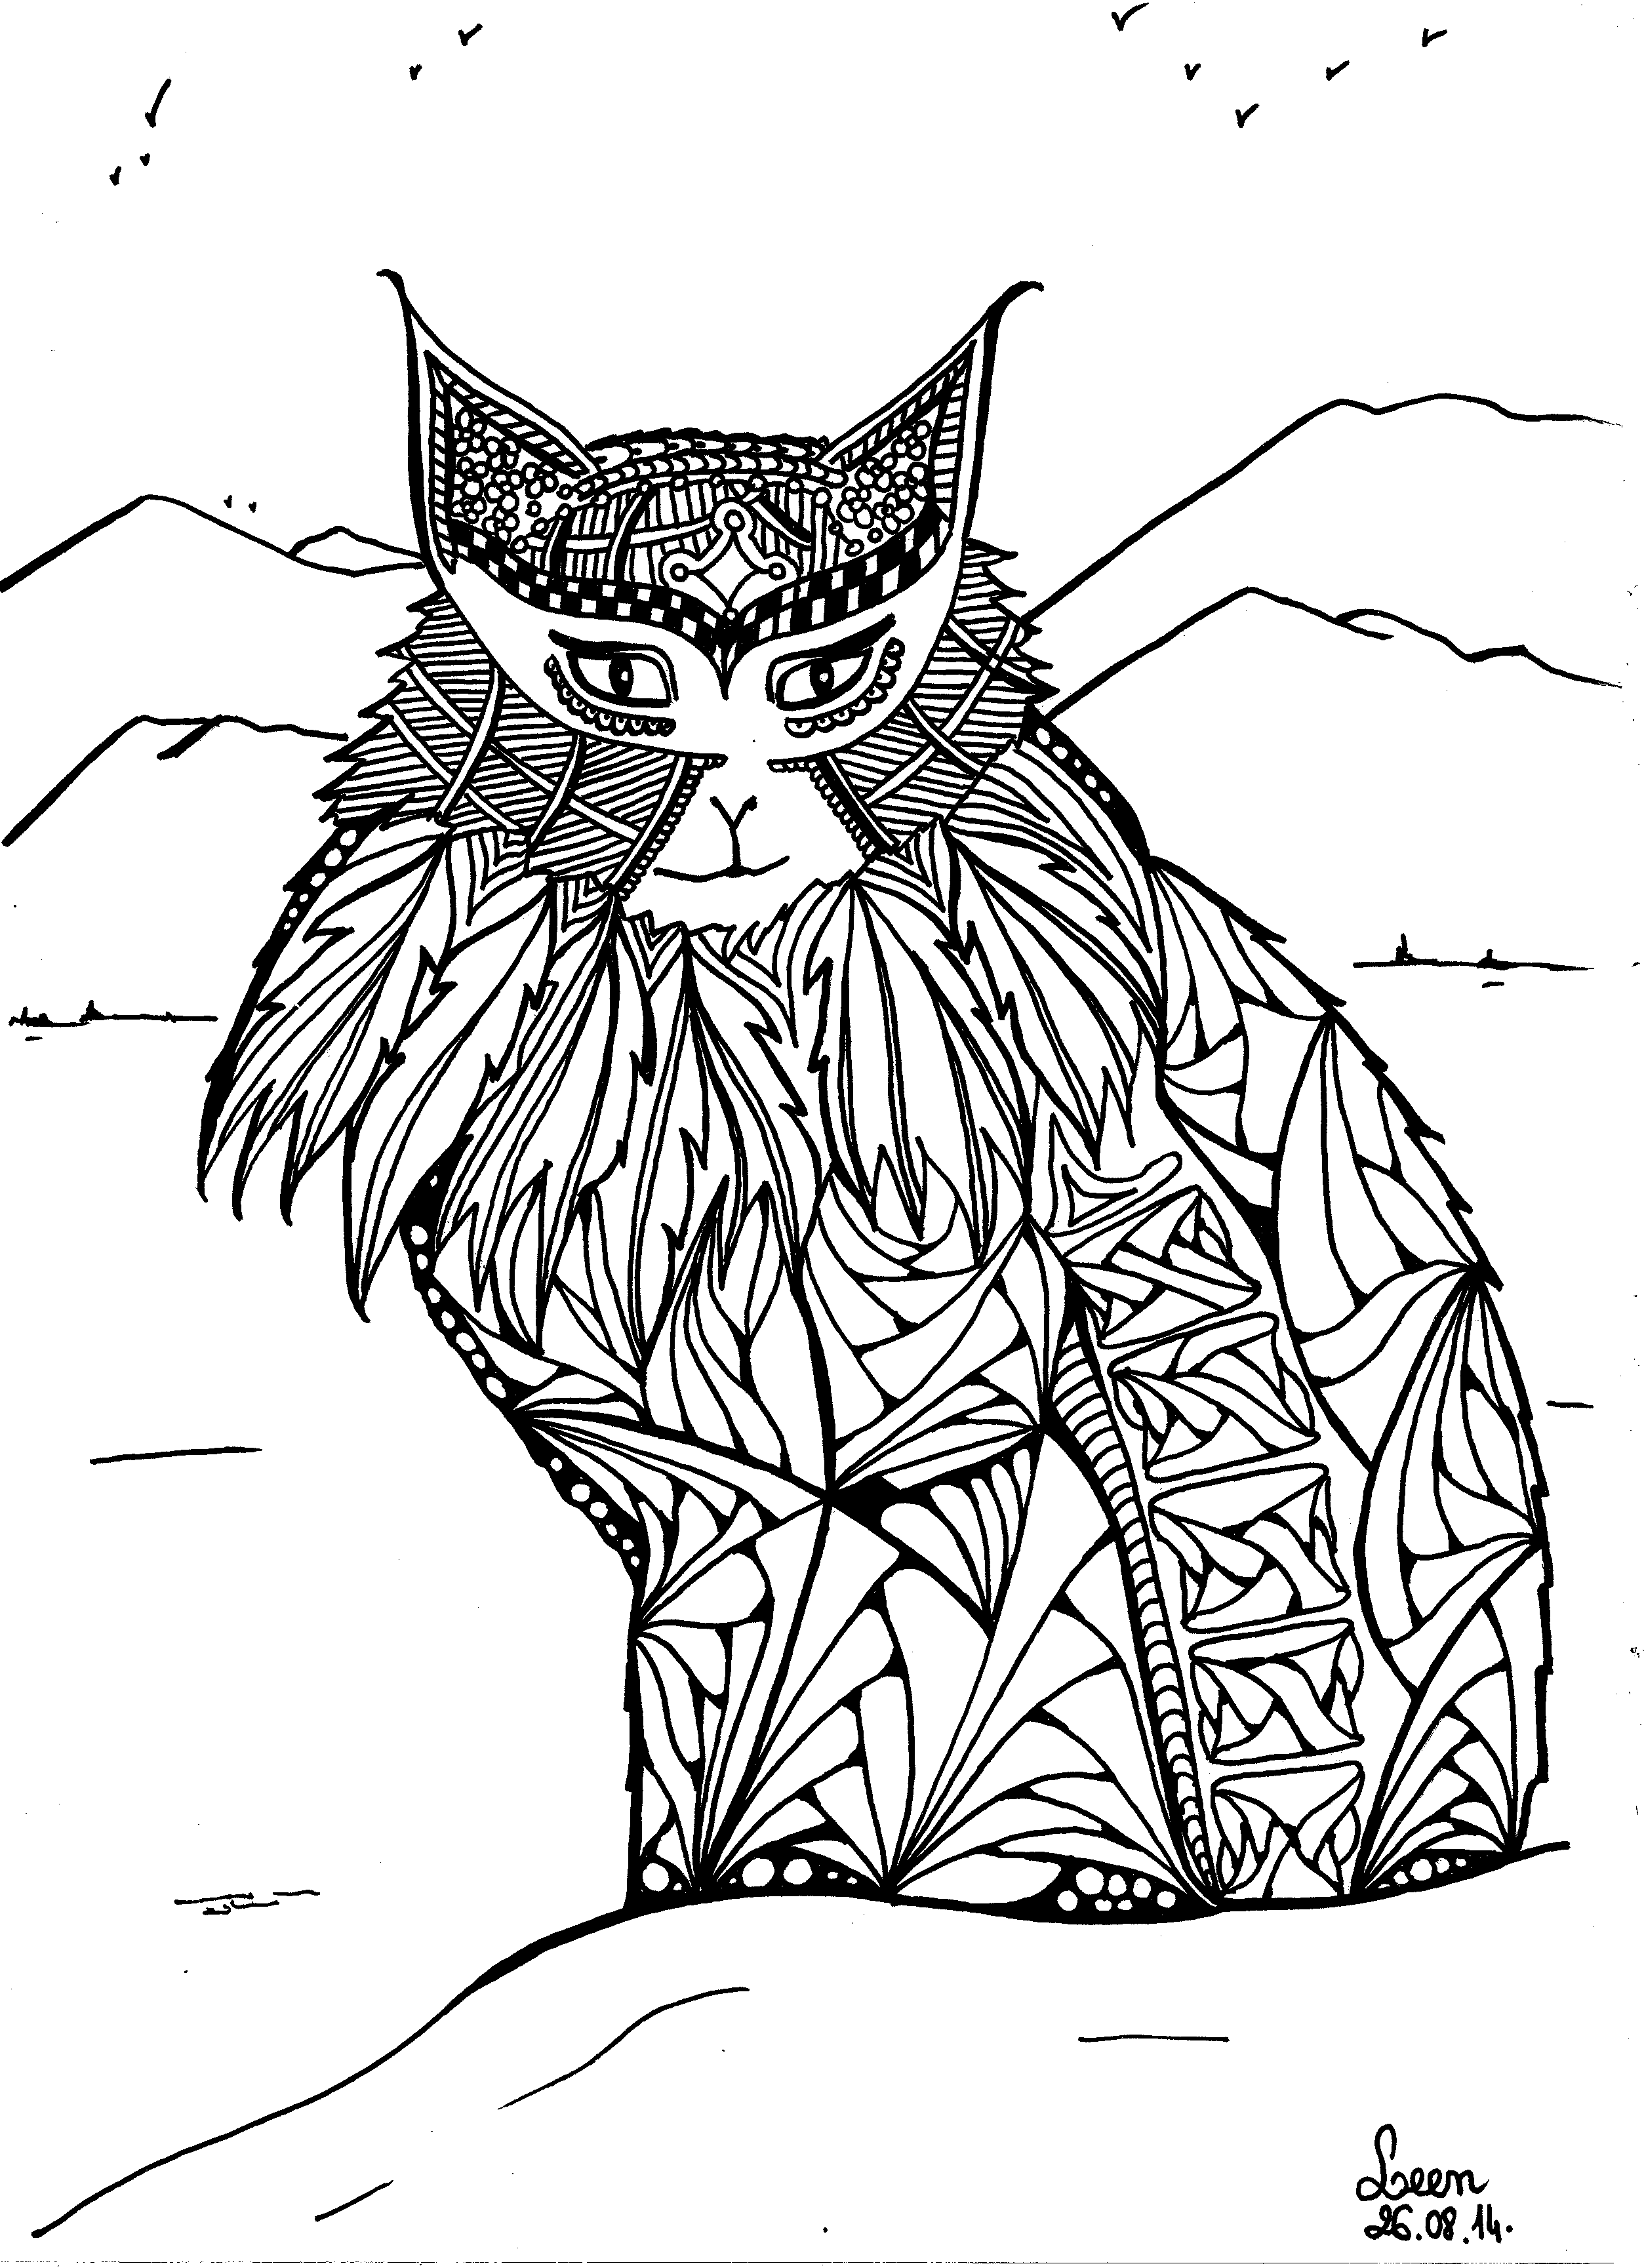 Adult coloring page to download